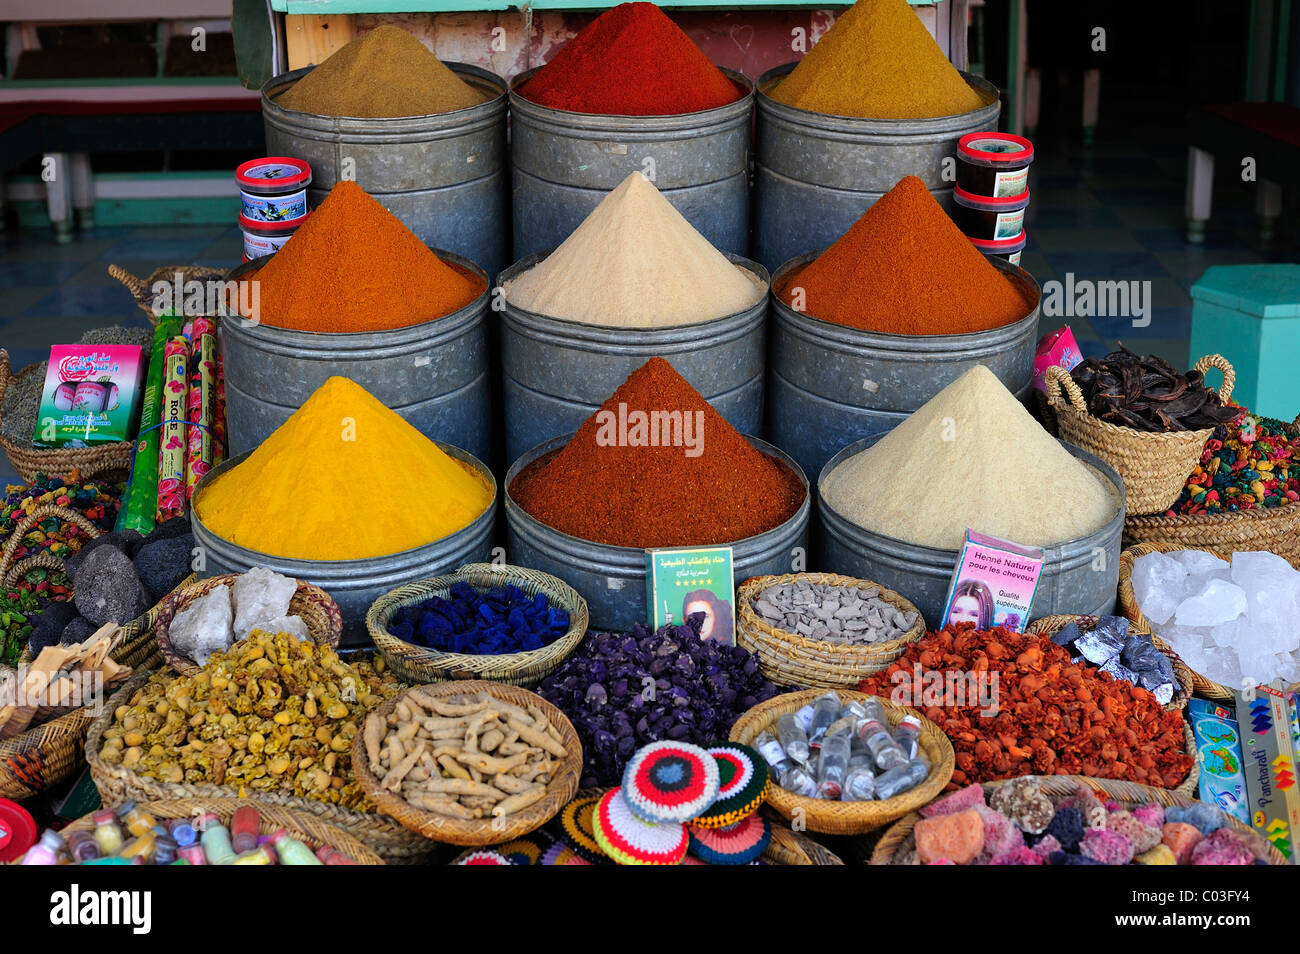 Various spices and other goods for sale, Marrakech, Morocco, Africa Stock Photo